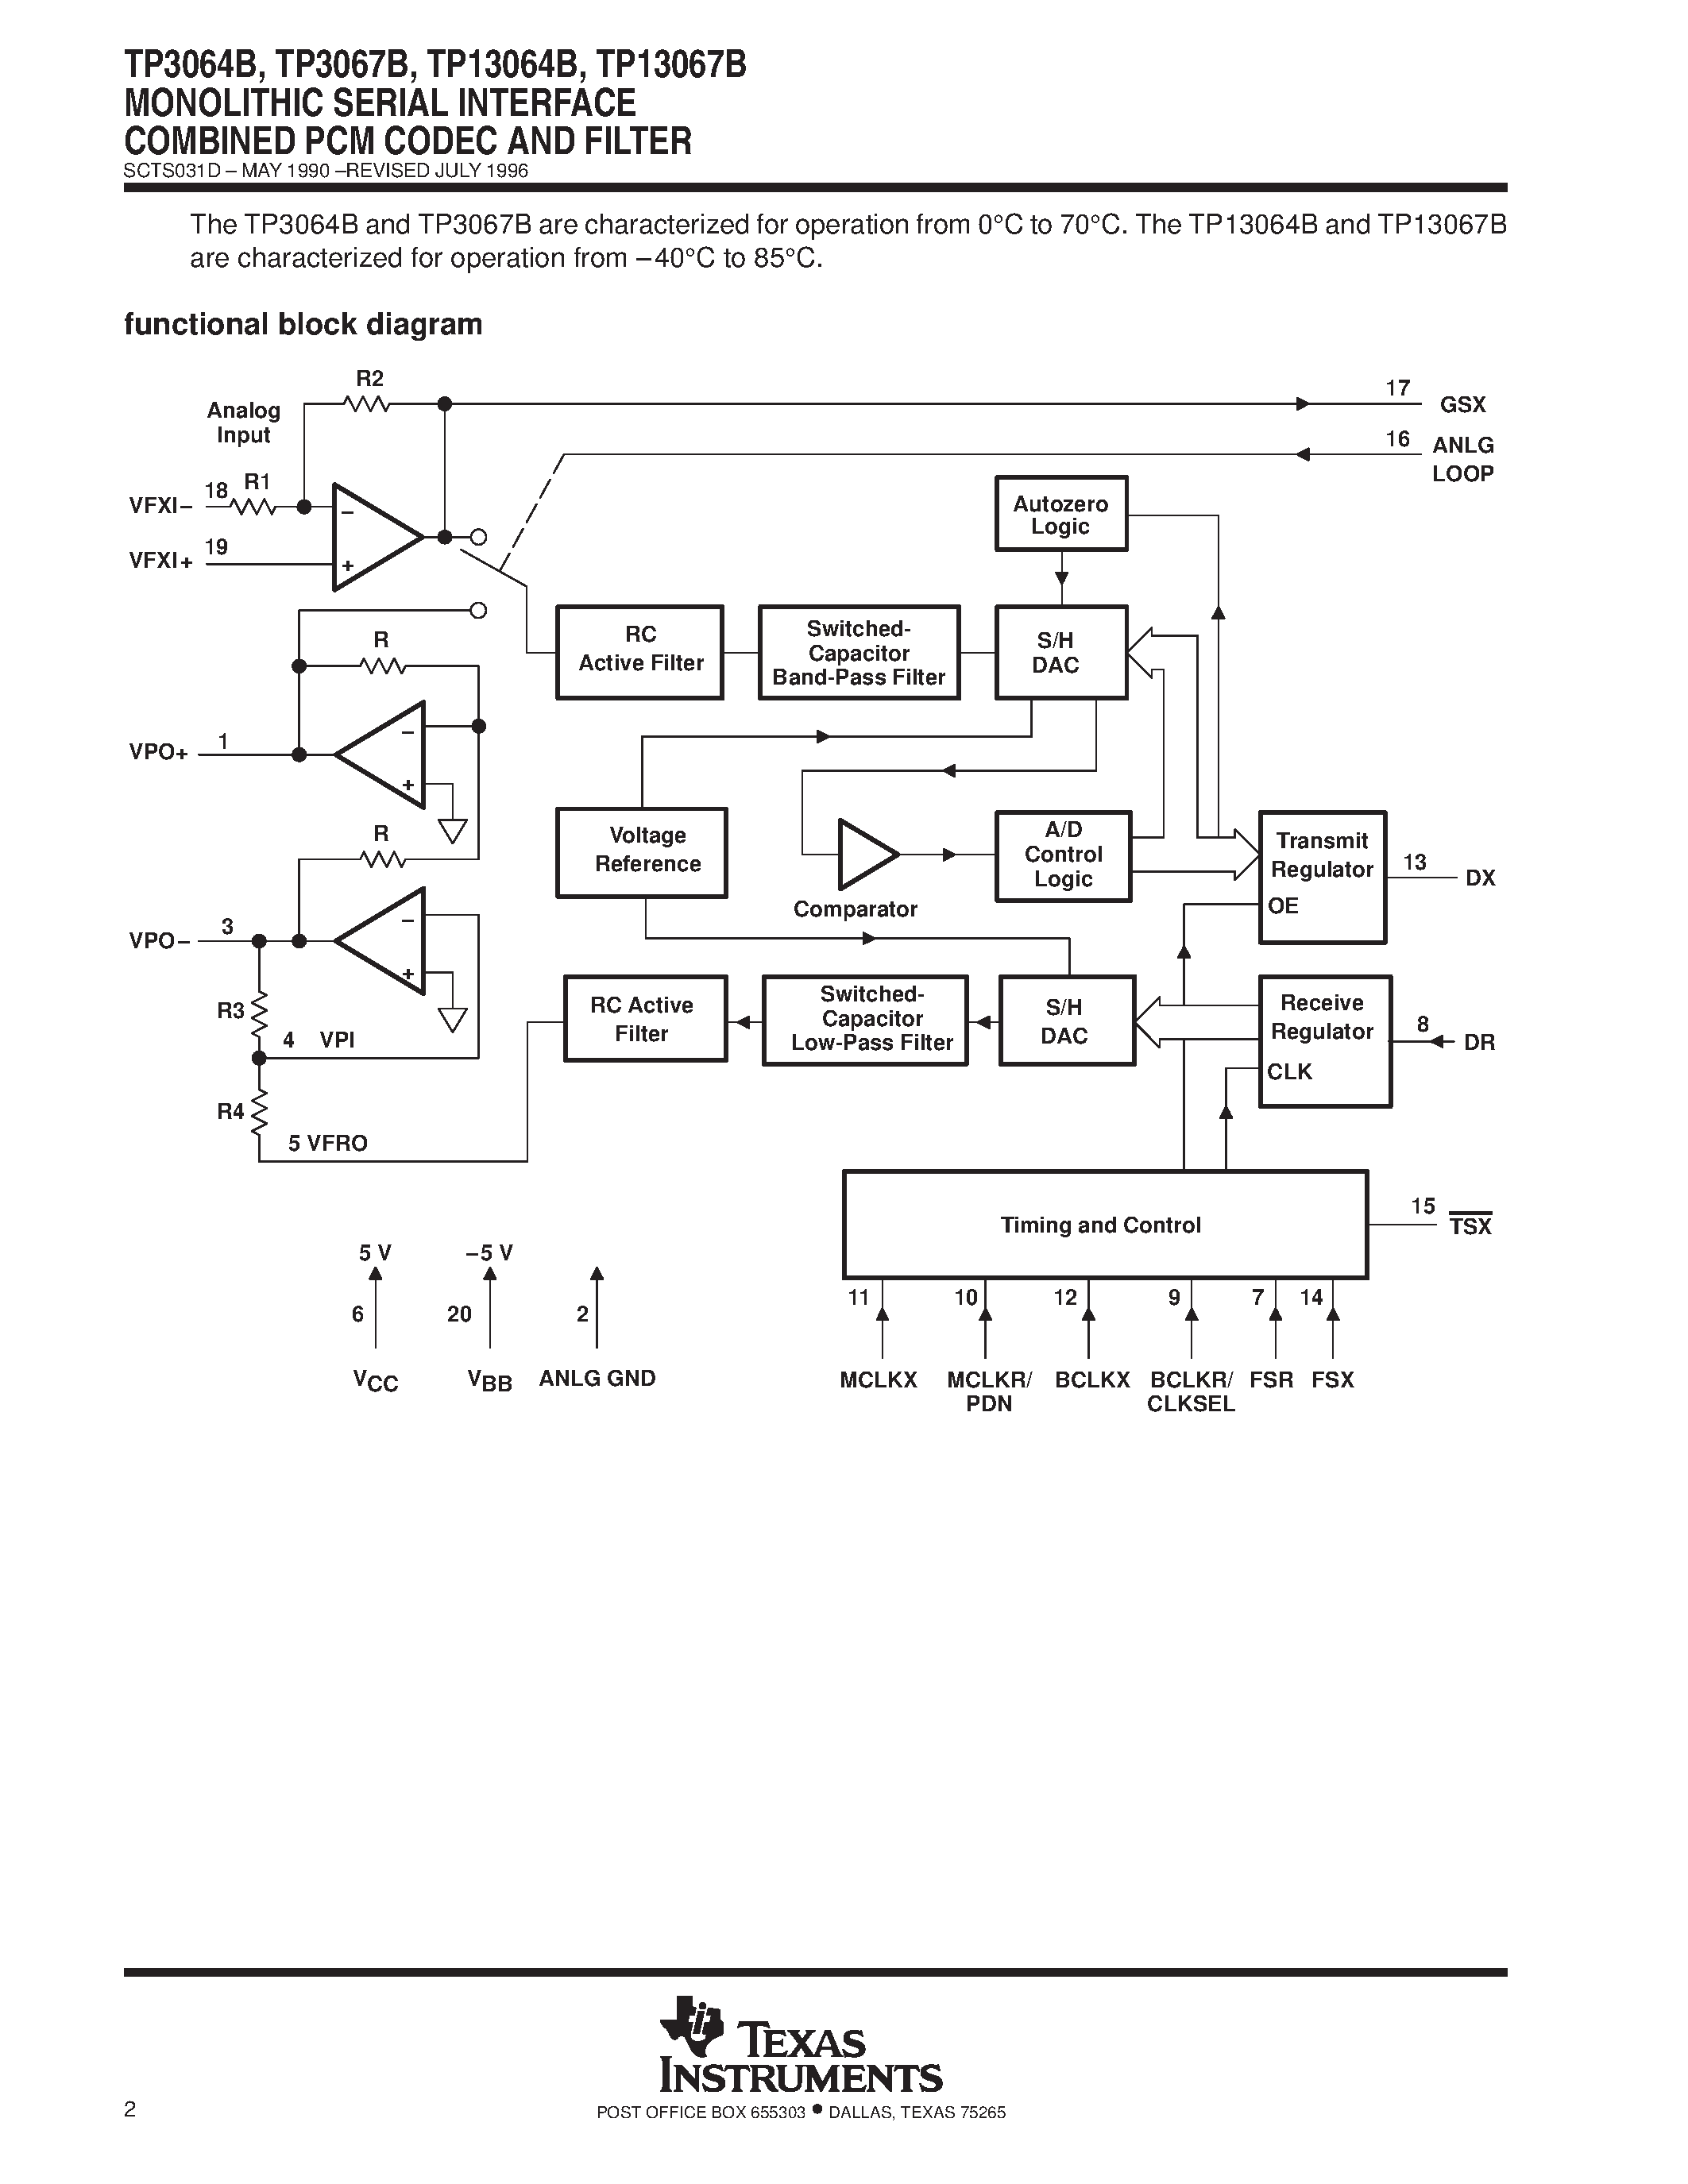 Datasheet TP13067BDW - MONOLITHIC SERIAL INTERFACE COMBINED PCM CODEC AND FILTER page 2